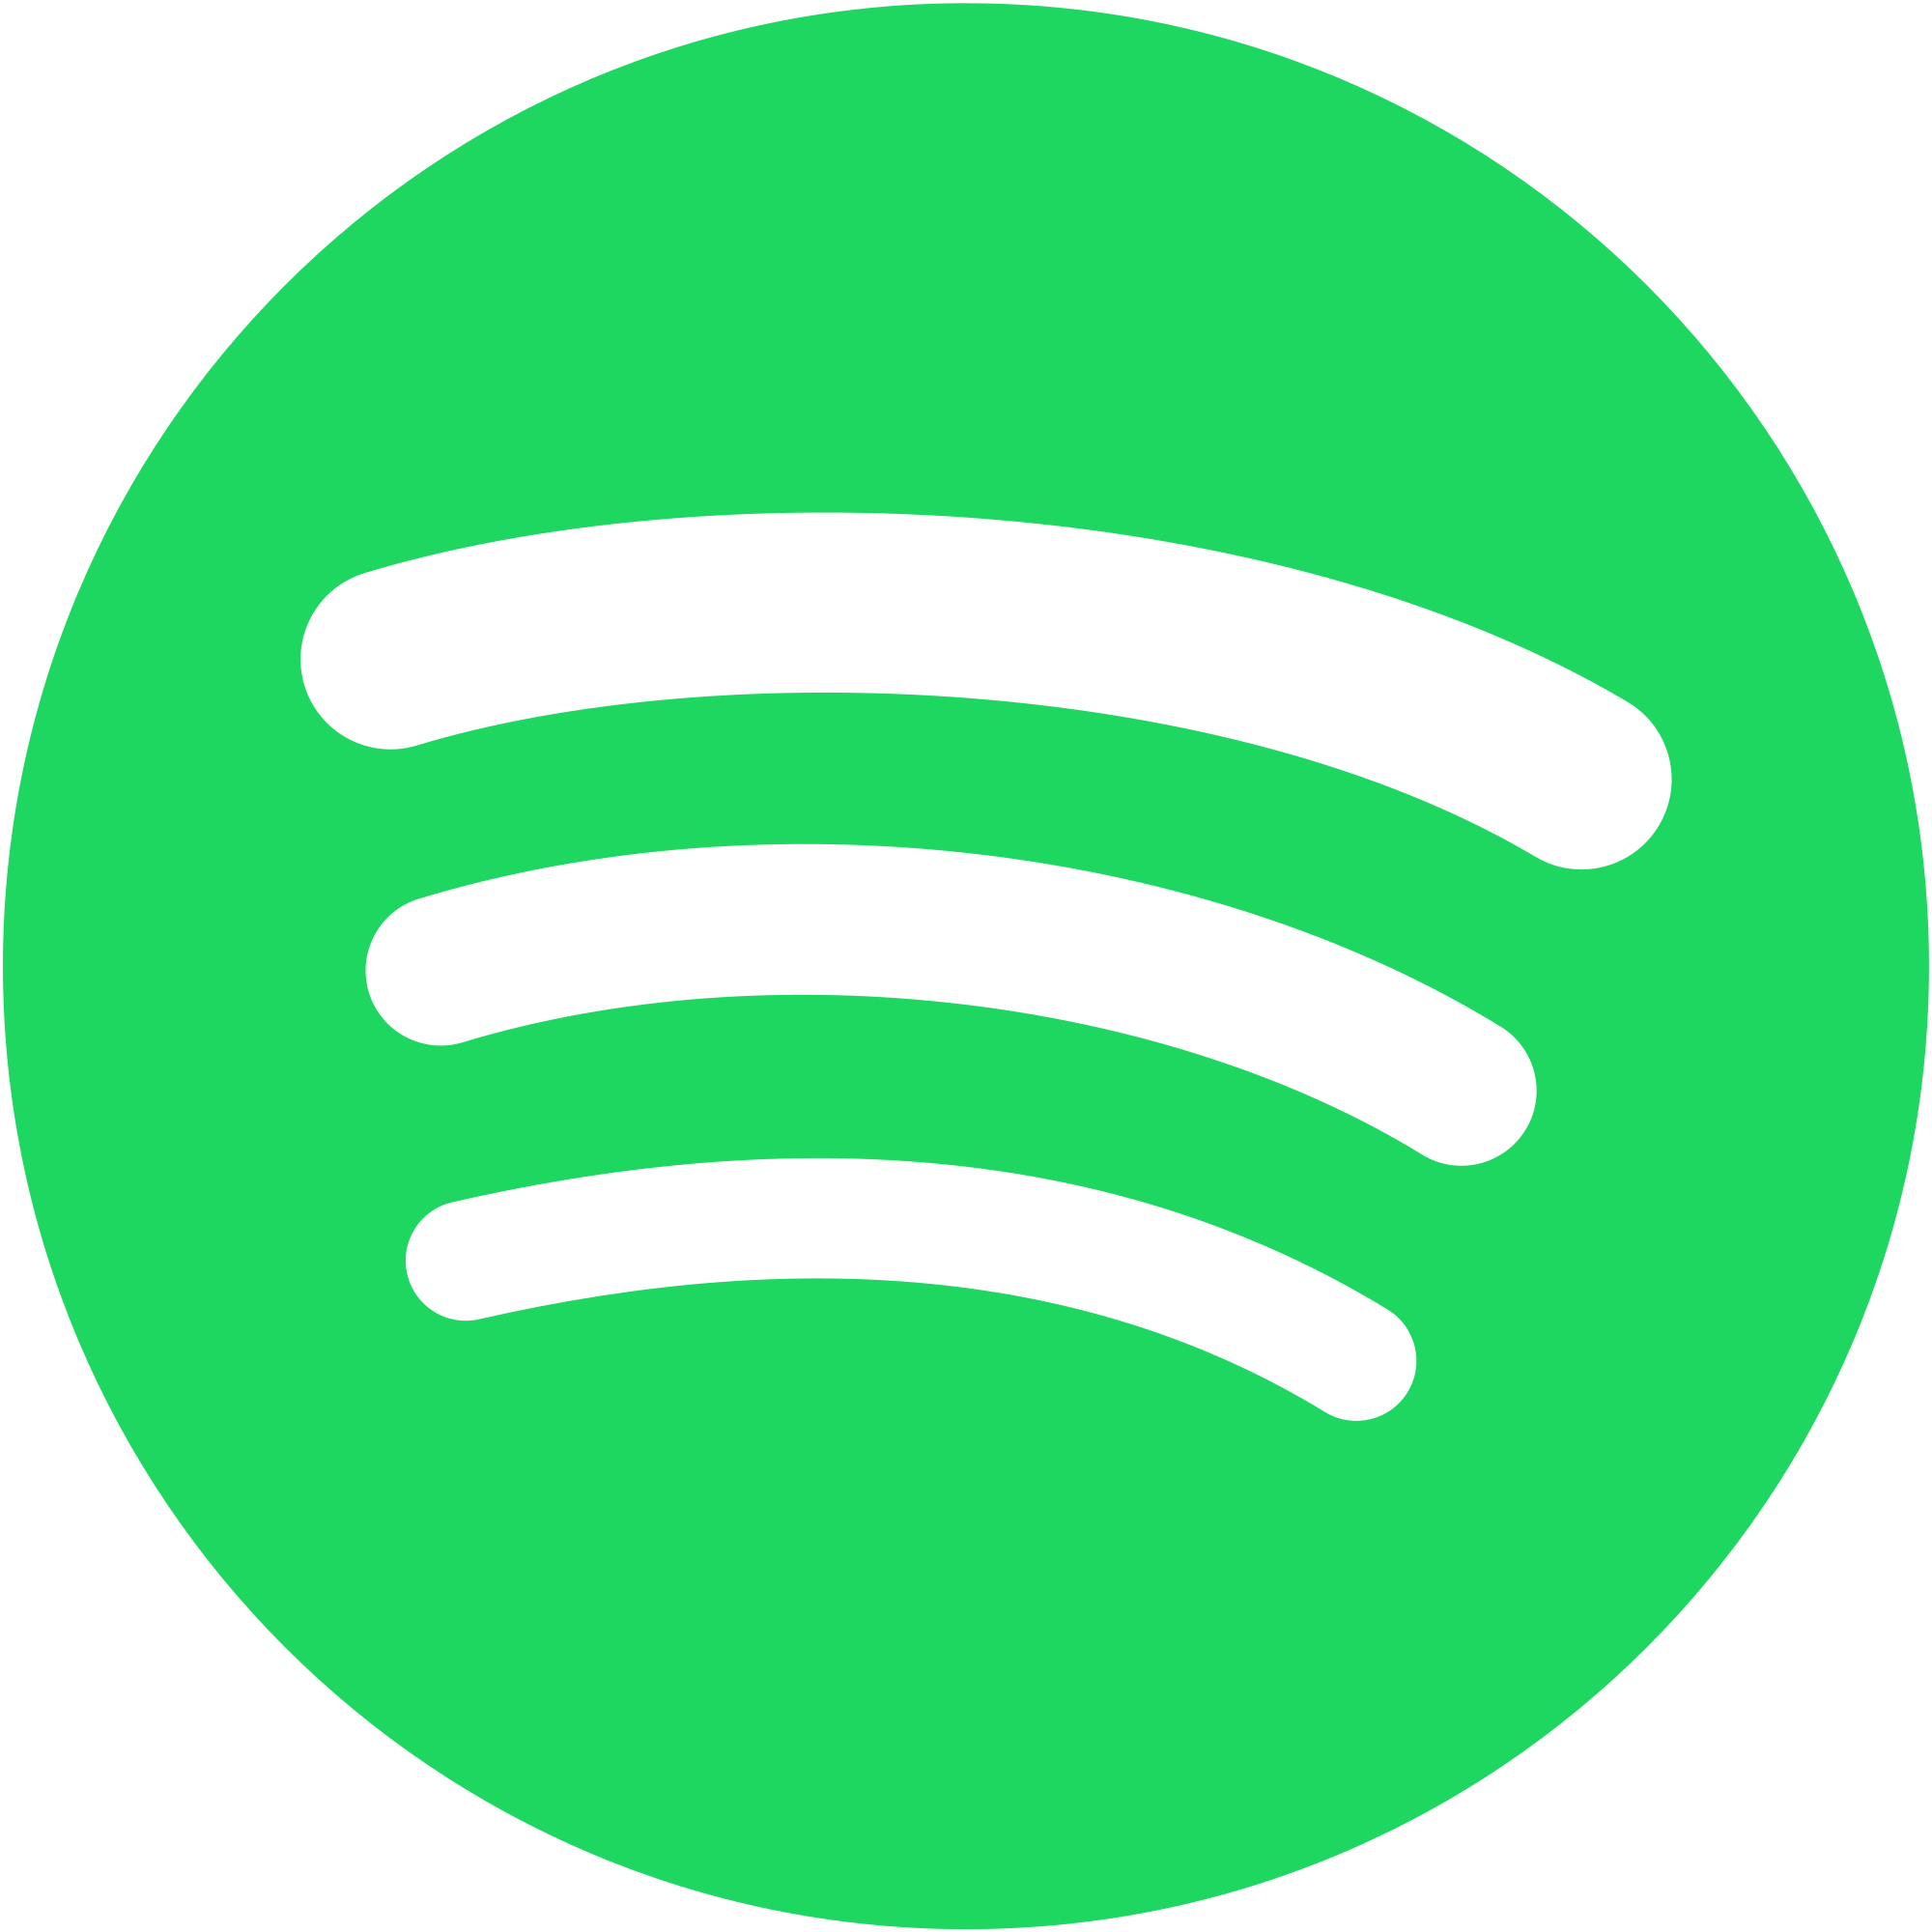 Spotify Streaming Music Service